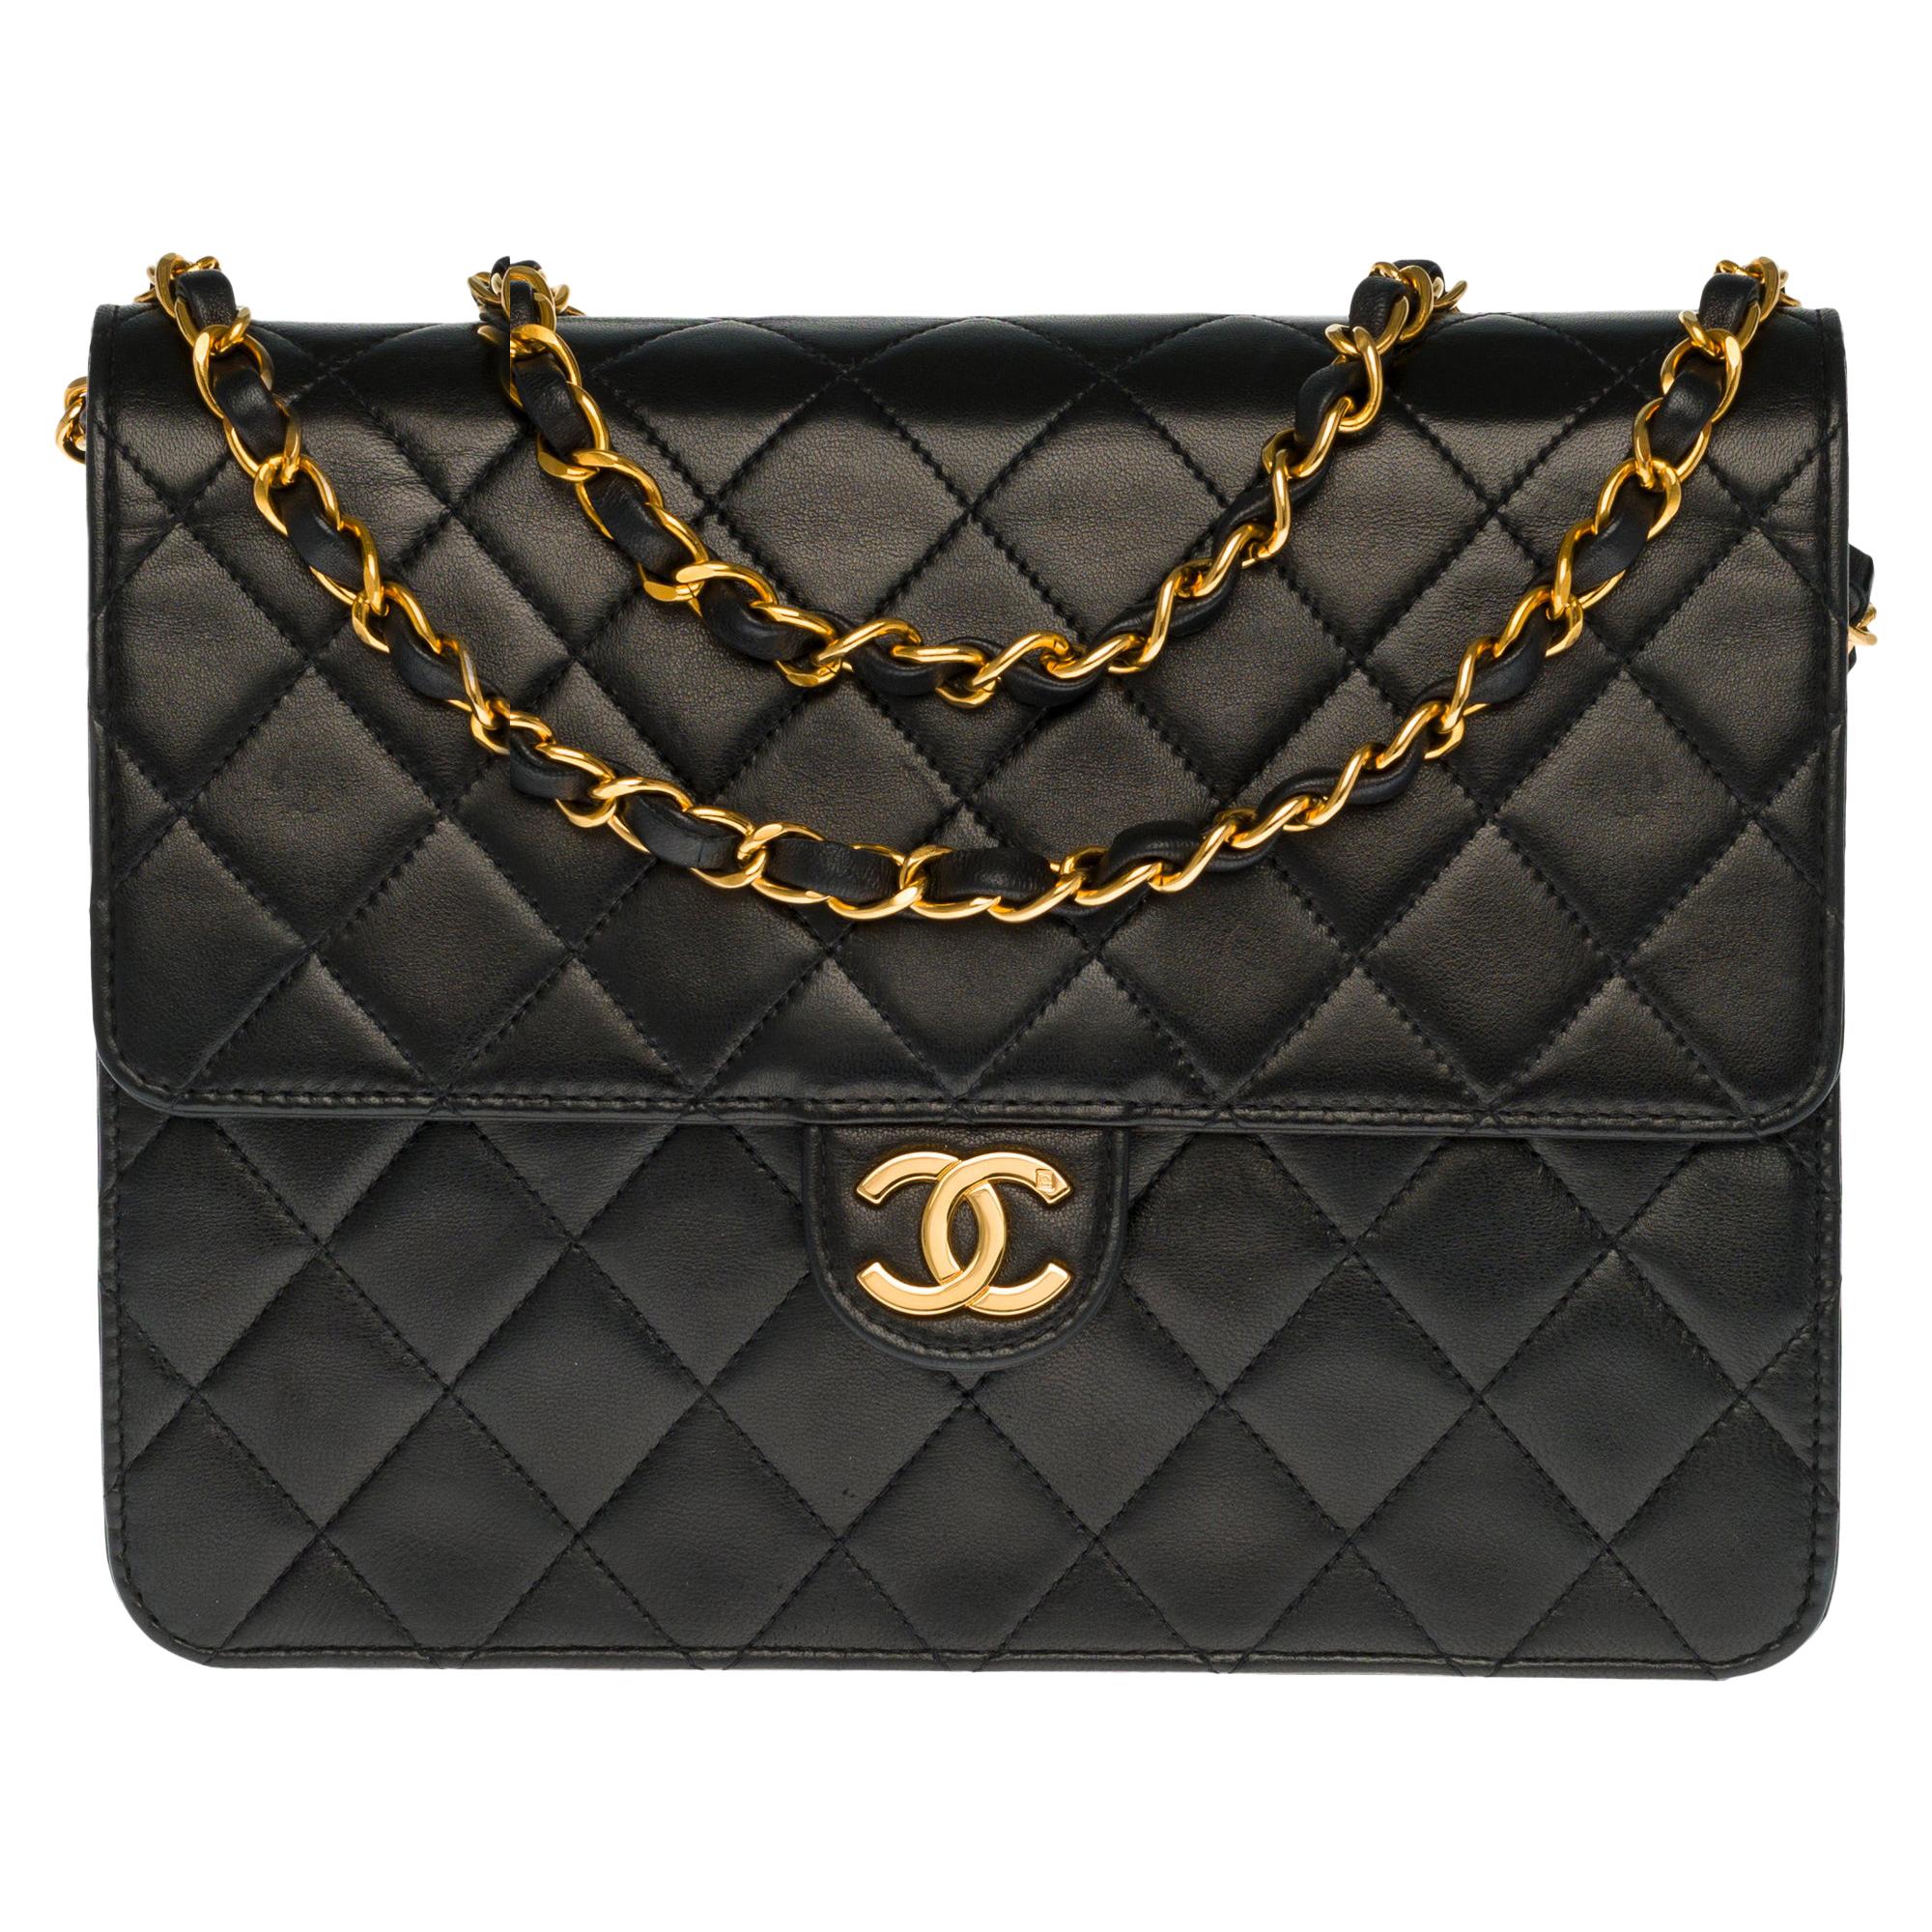 Rare Chanel Classic 22cm shoulder bag in black quilted lambskin with GHW